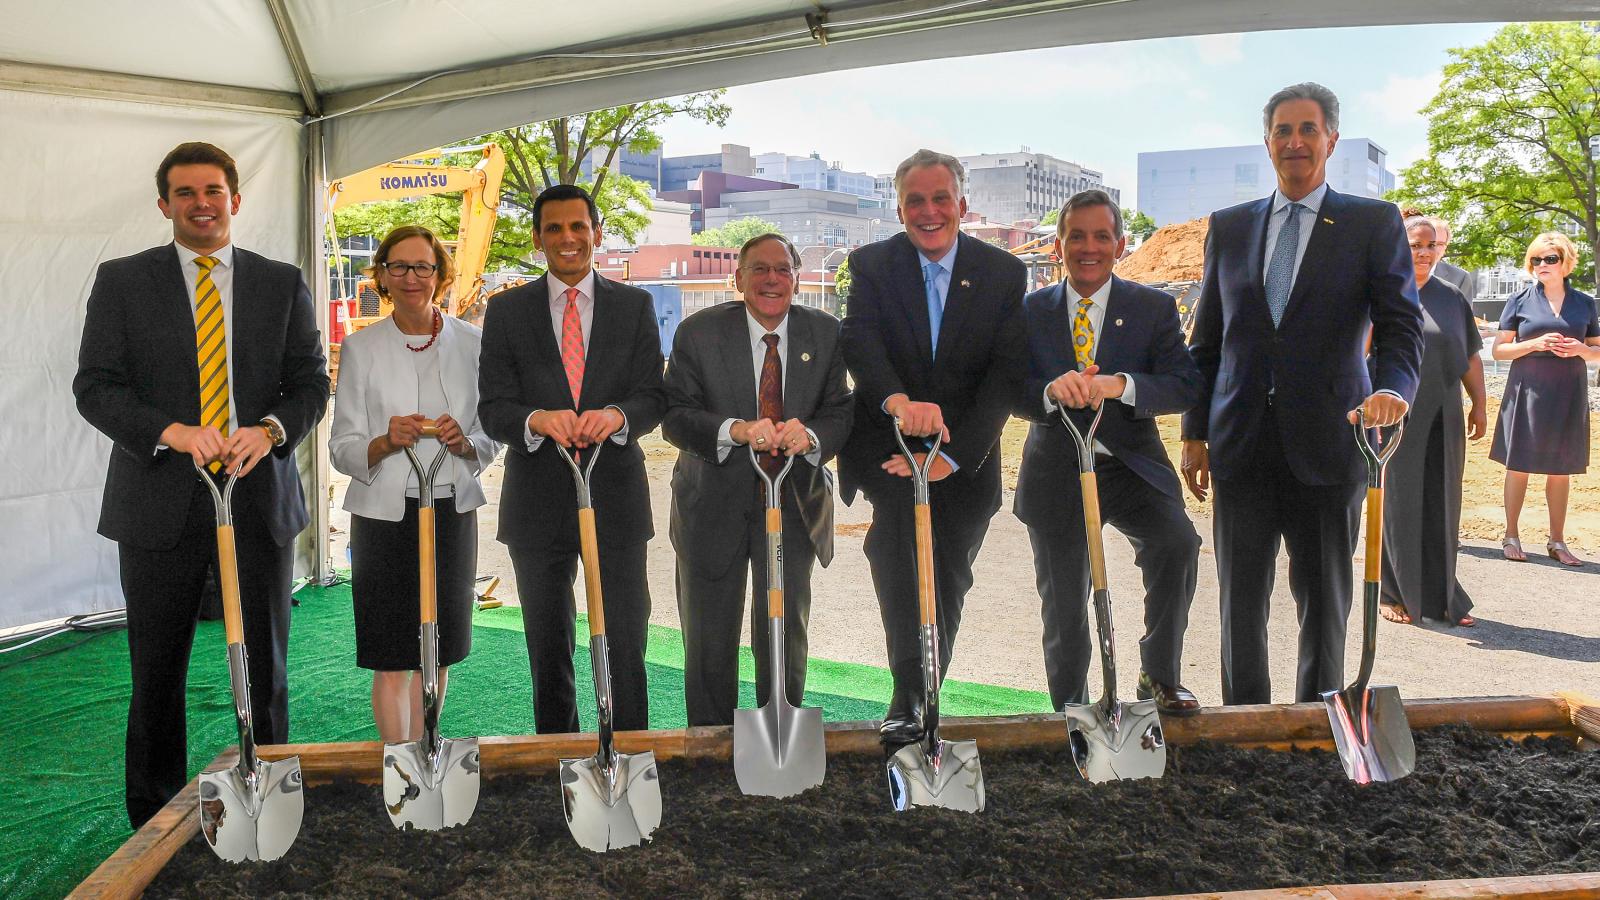 Officials with shovels at groundbreaking